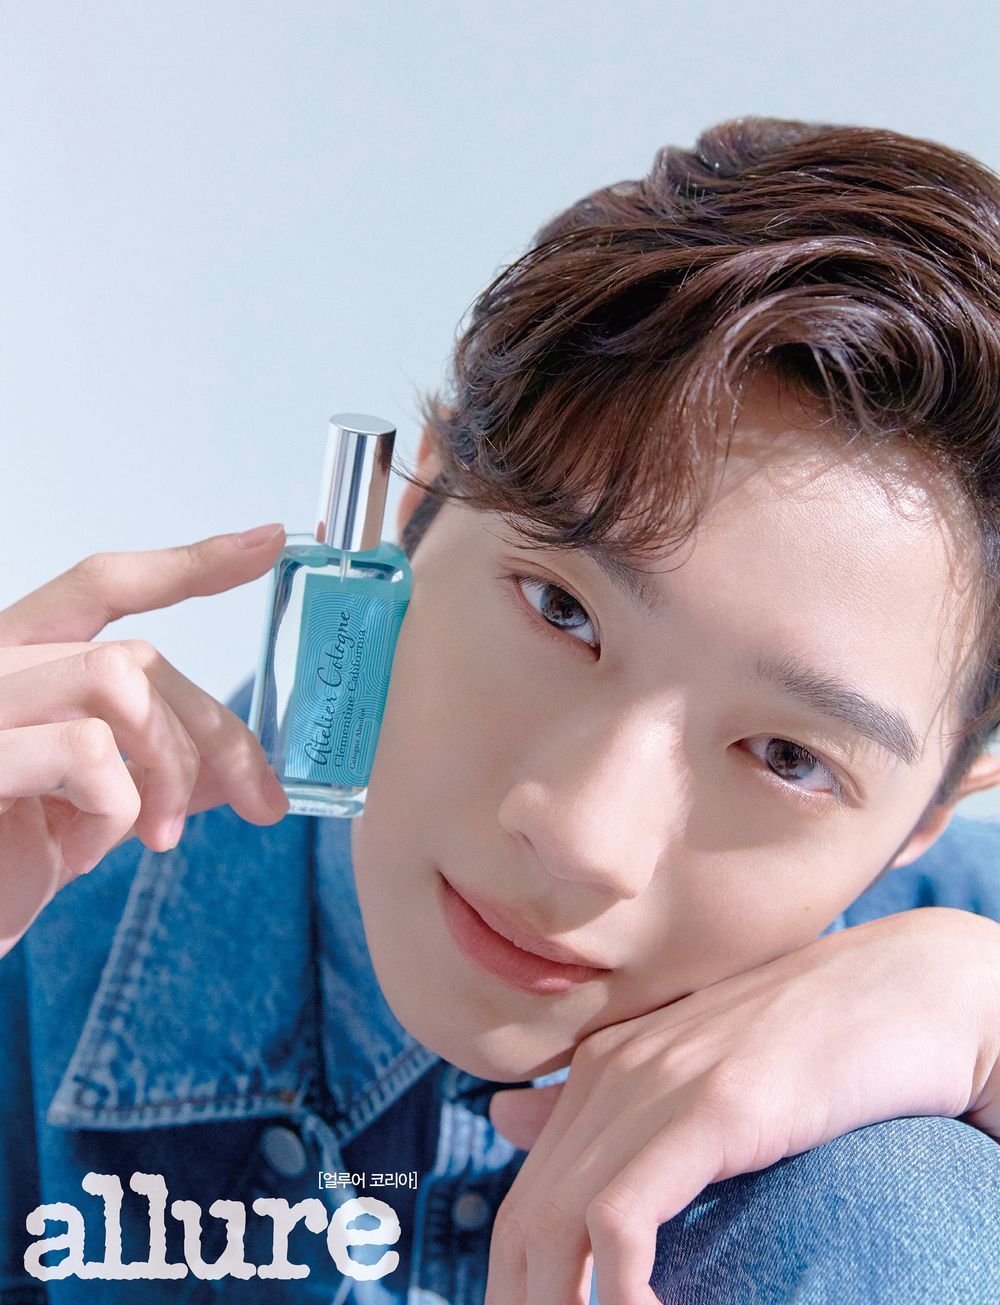 On the 18th, a perfume picture with magazine Allure and Lai Kuan-lin was released.Lai Kuan-lin, who posed with the Clementine California perfume by Atelier Cologne, was captured.An official of the picture said, We showed a variety of appearances from boyhood full of refreshing beauty to sophisticated masculine beauty with sculpture-like appearance and gentle eyes.More pictures of Lai Kuan-lin can be found in the July issue of Allure.